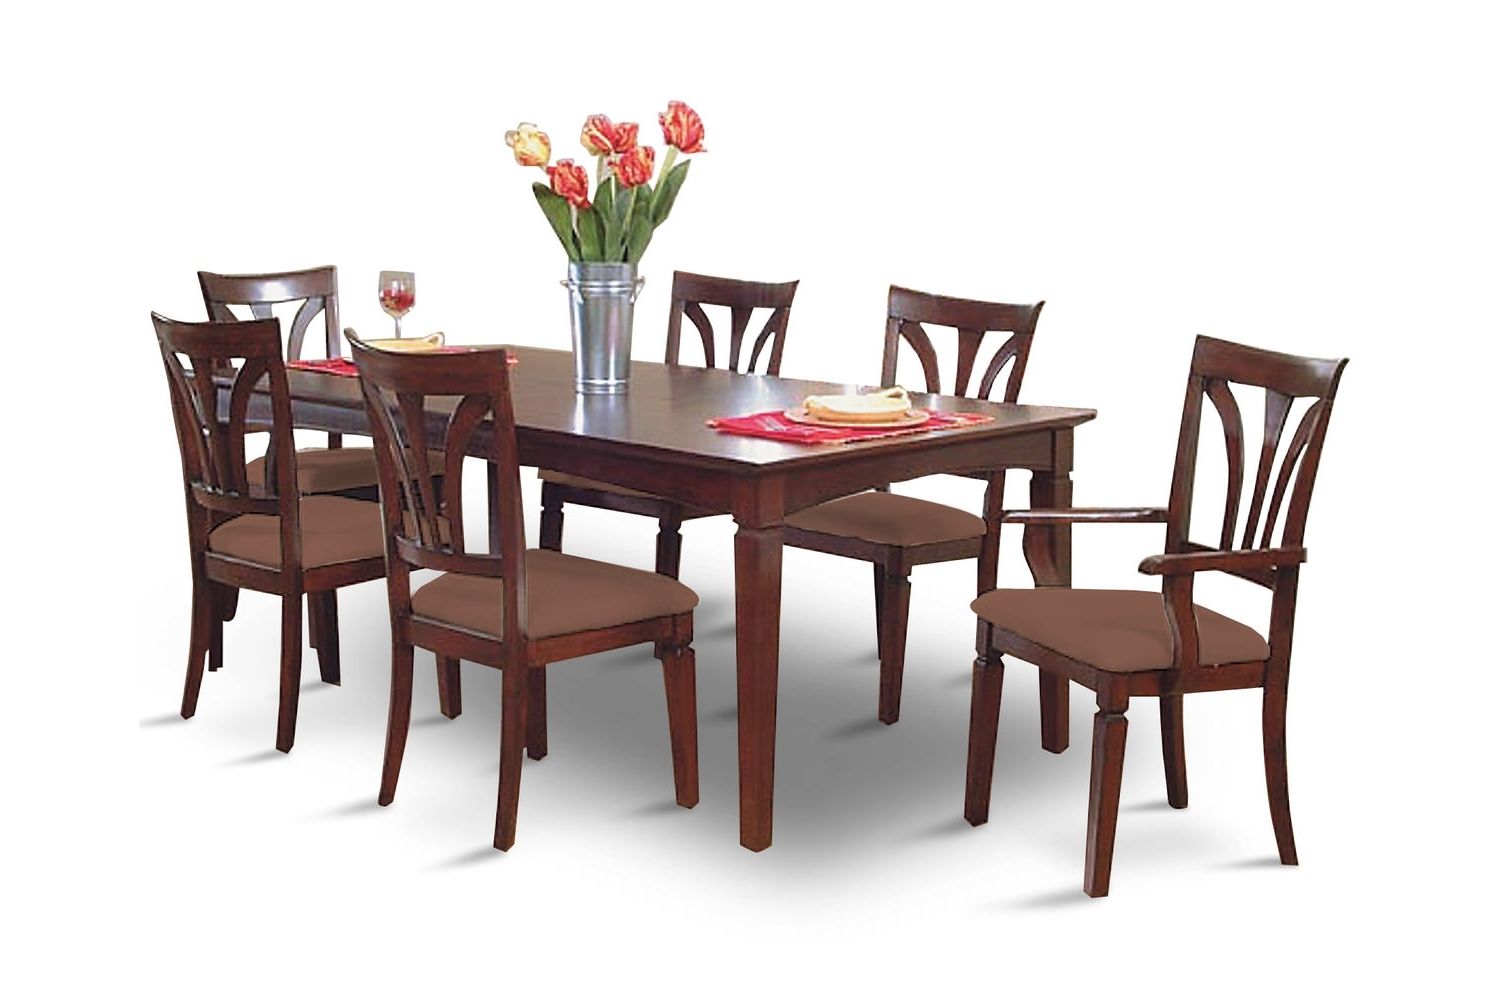 Fashionable Dining Sets – Kitchen & Dining Room Sets – Hom Furniture Intended For Dining Tables And Chairs (View 16 of 25)